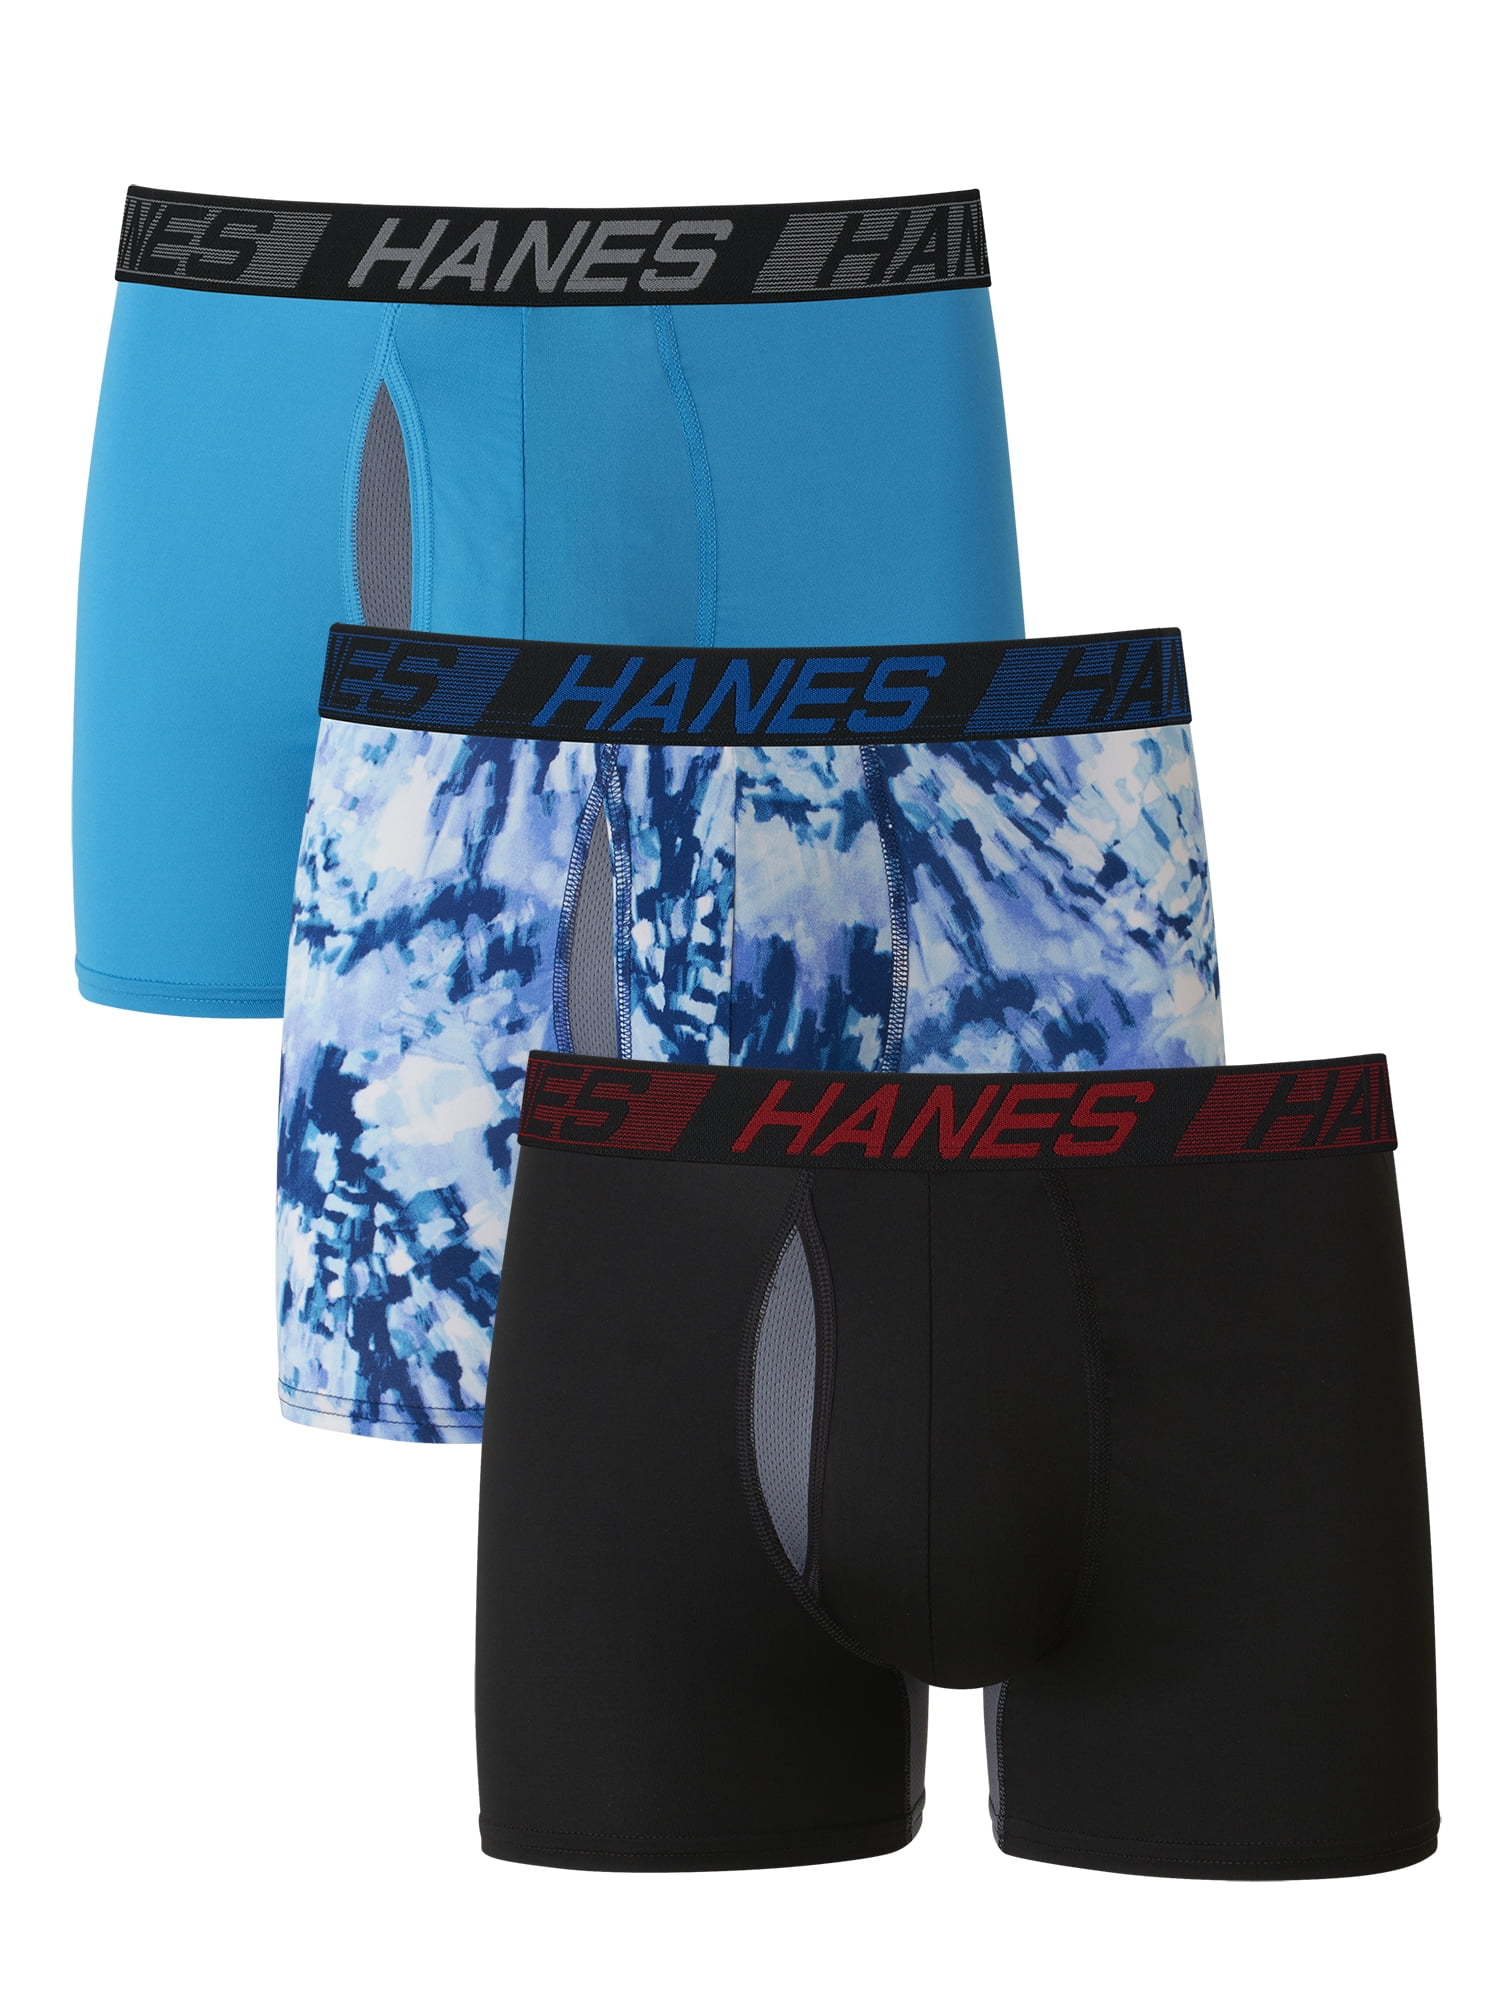 Hanes X-Temp Total Support Pouch Men's Trunks, Anti-Chafing Underwear ...